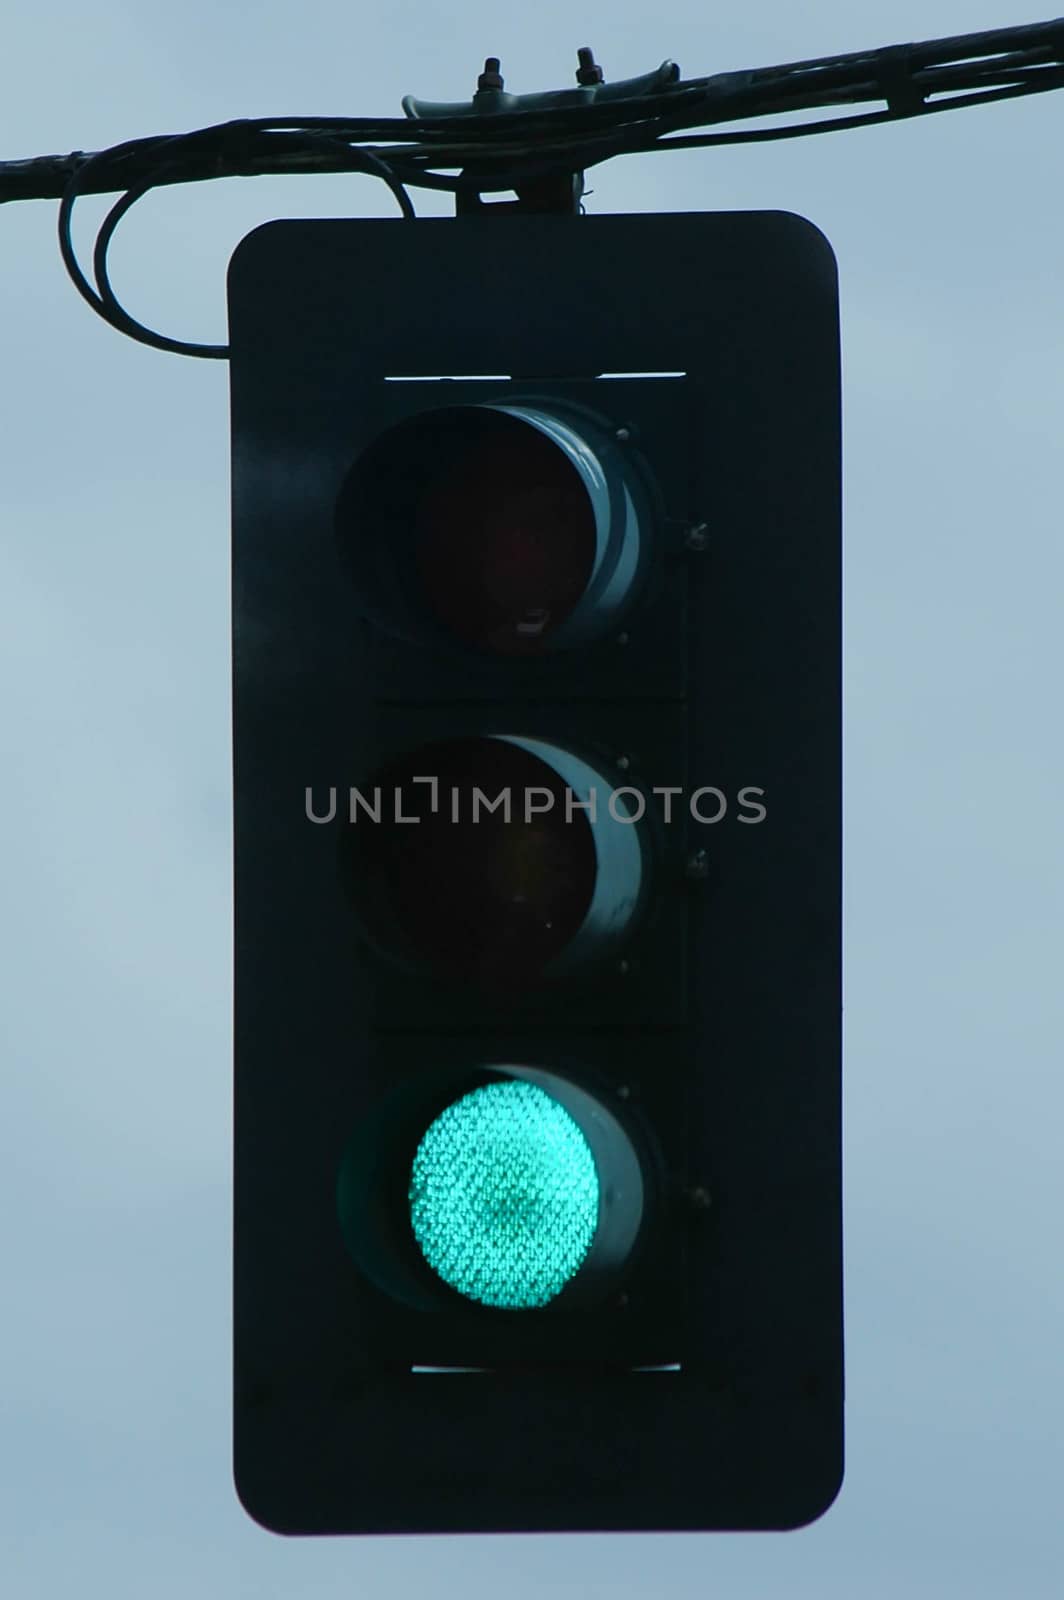 Traffic Light directing motorists and pedestrians to go